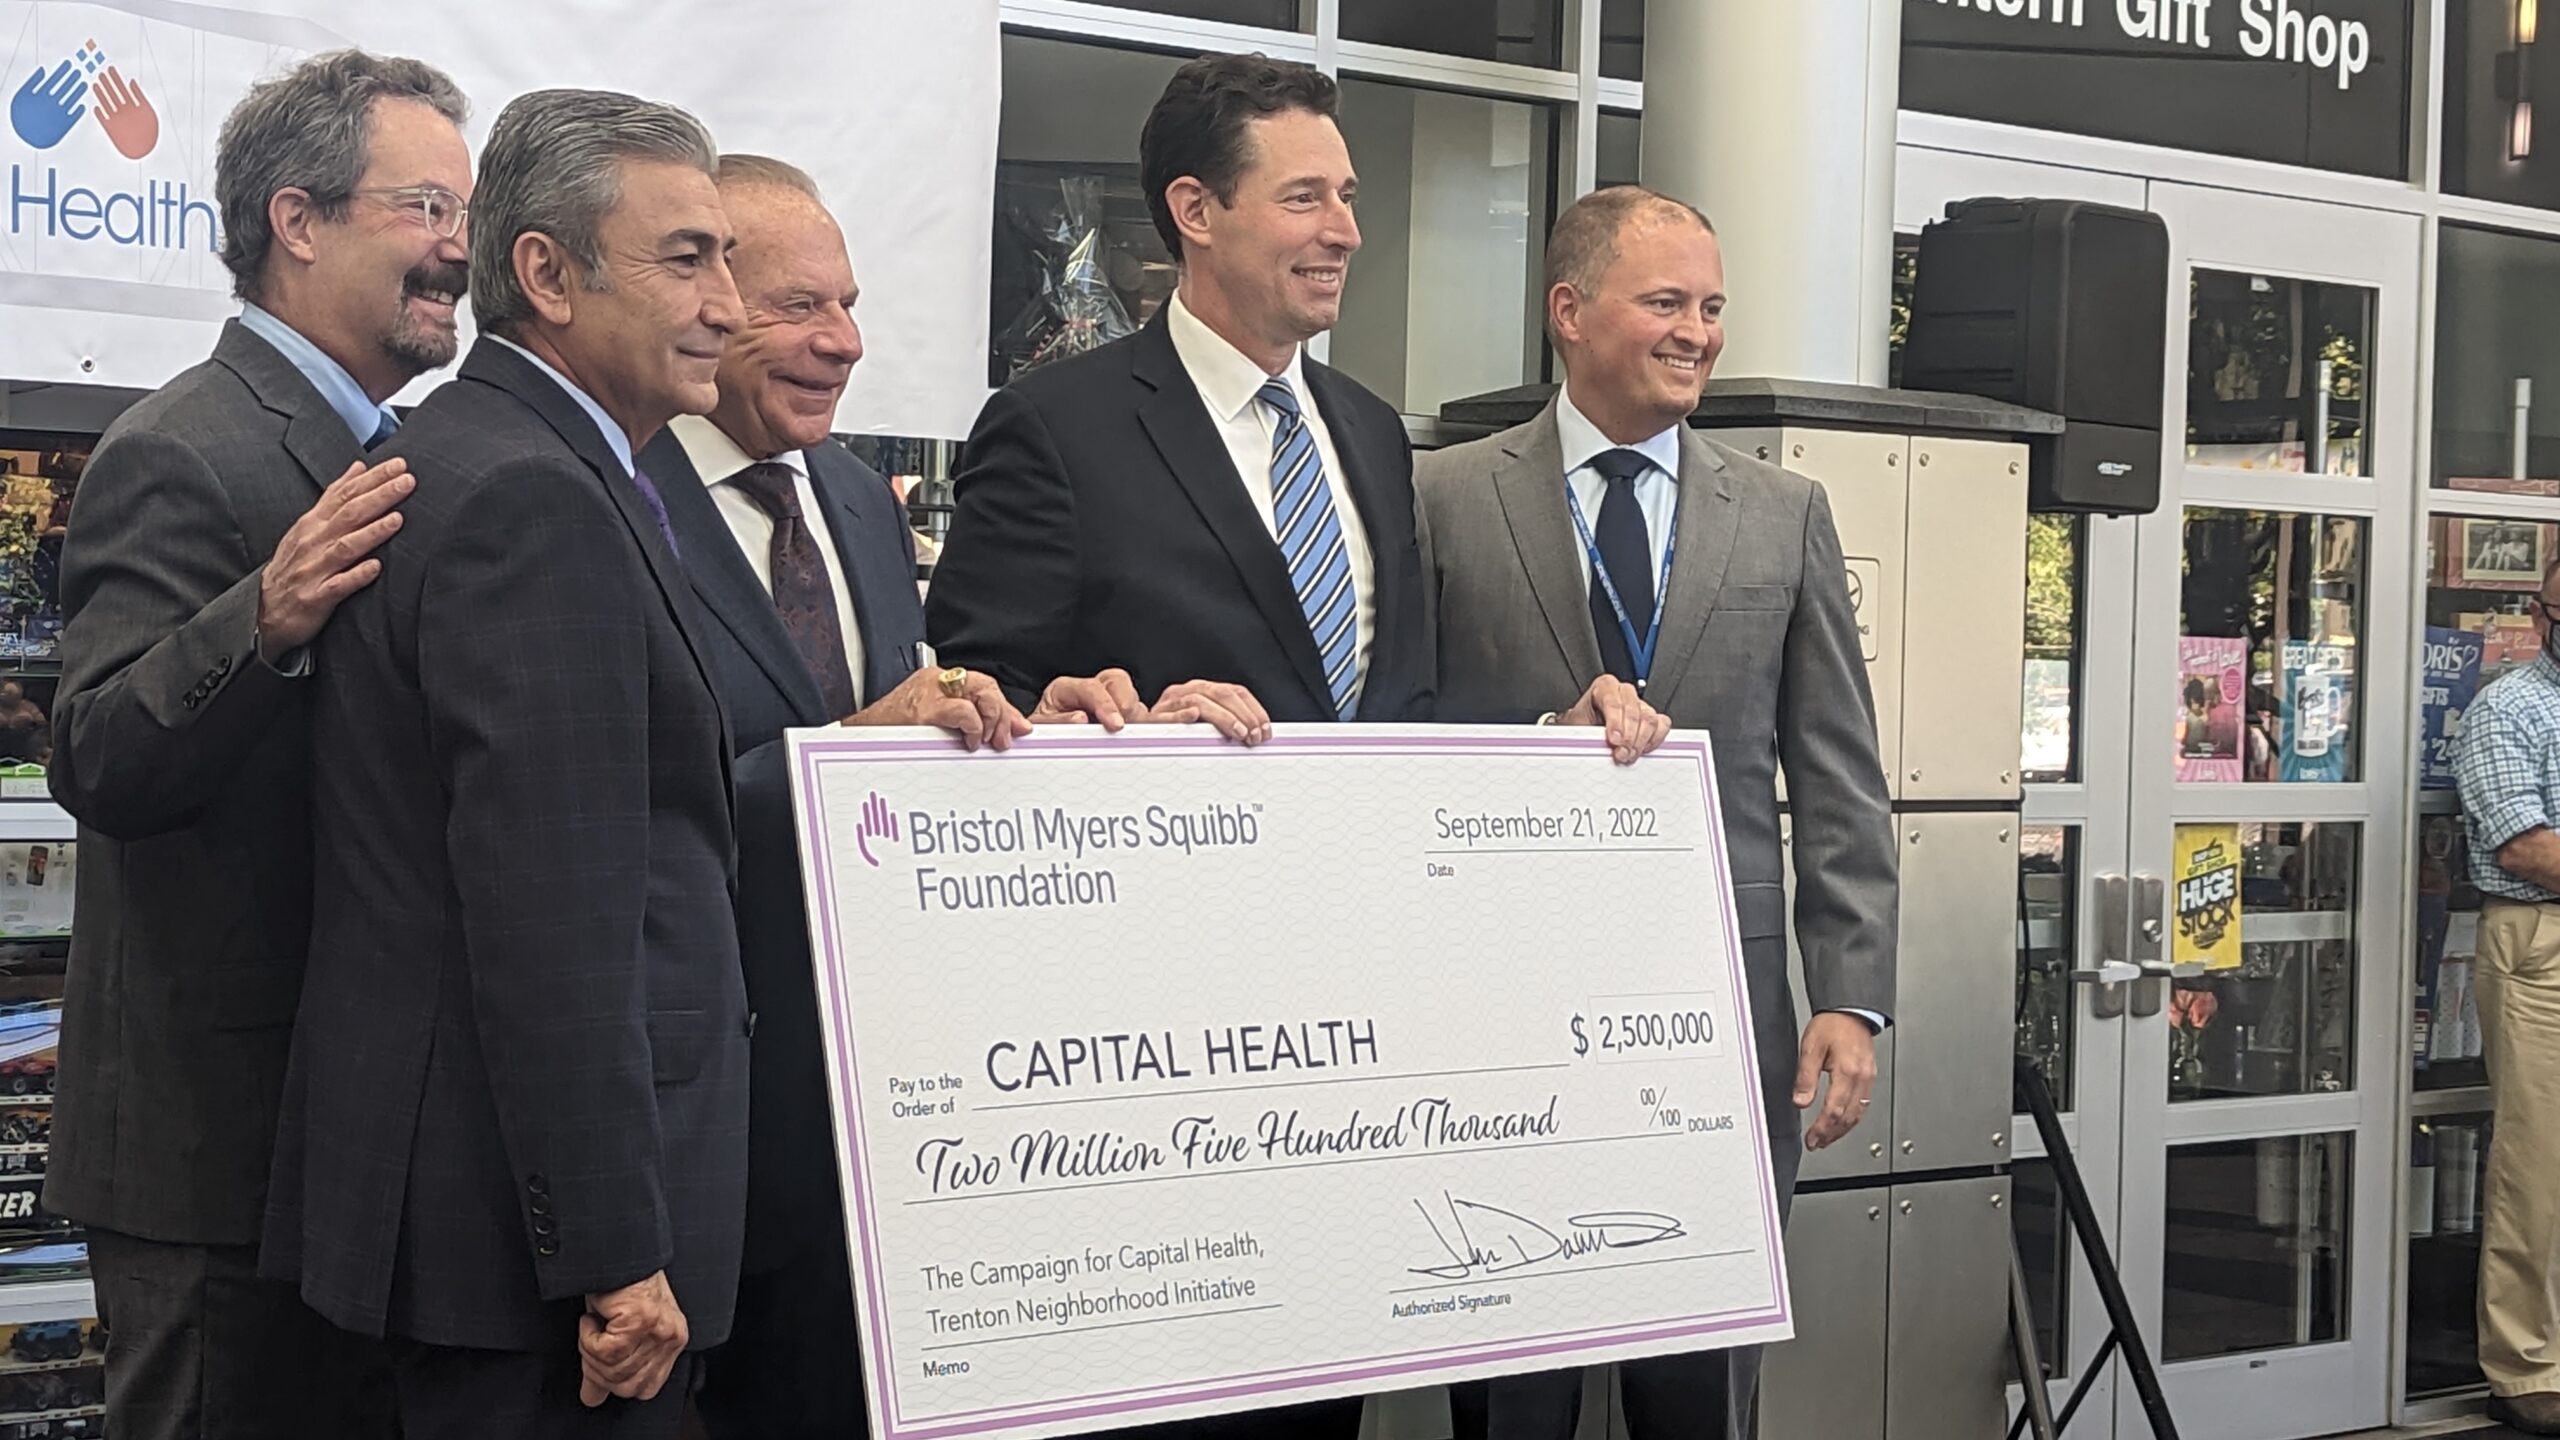 Capital Health Launches Trenton Neighborhood Initiative Leveraging $10 Million of Investment in Local Community